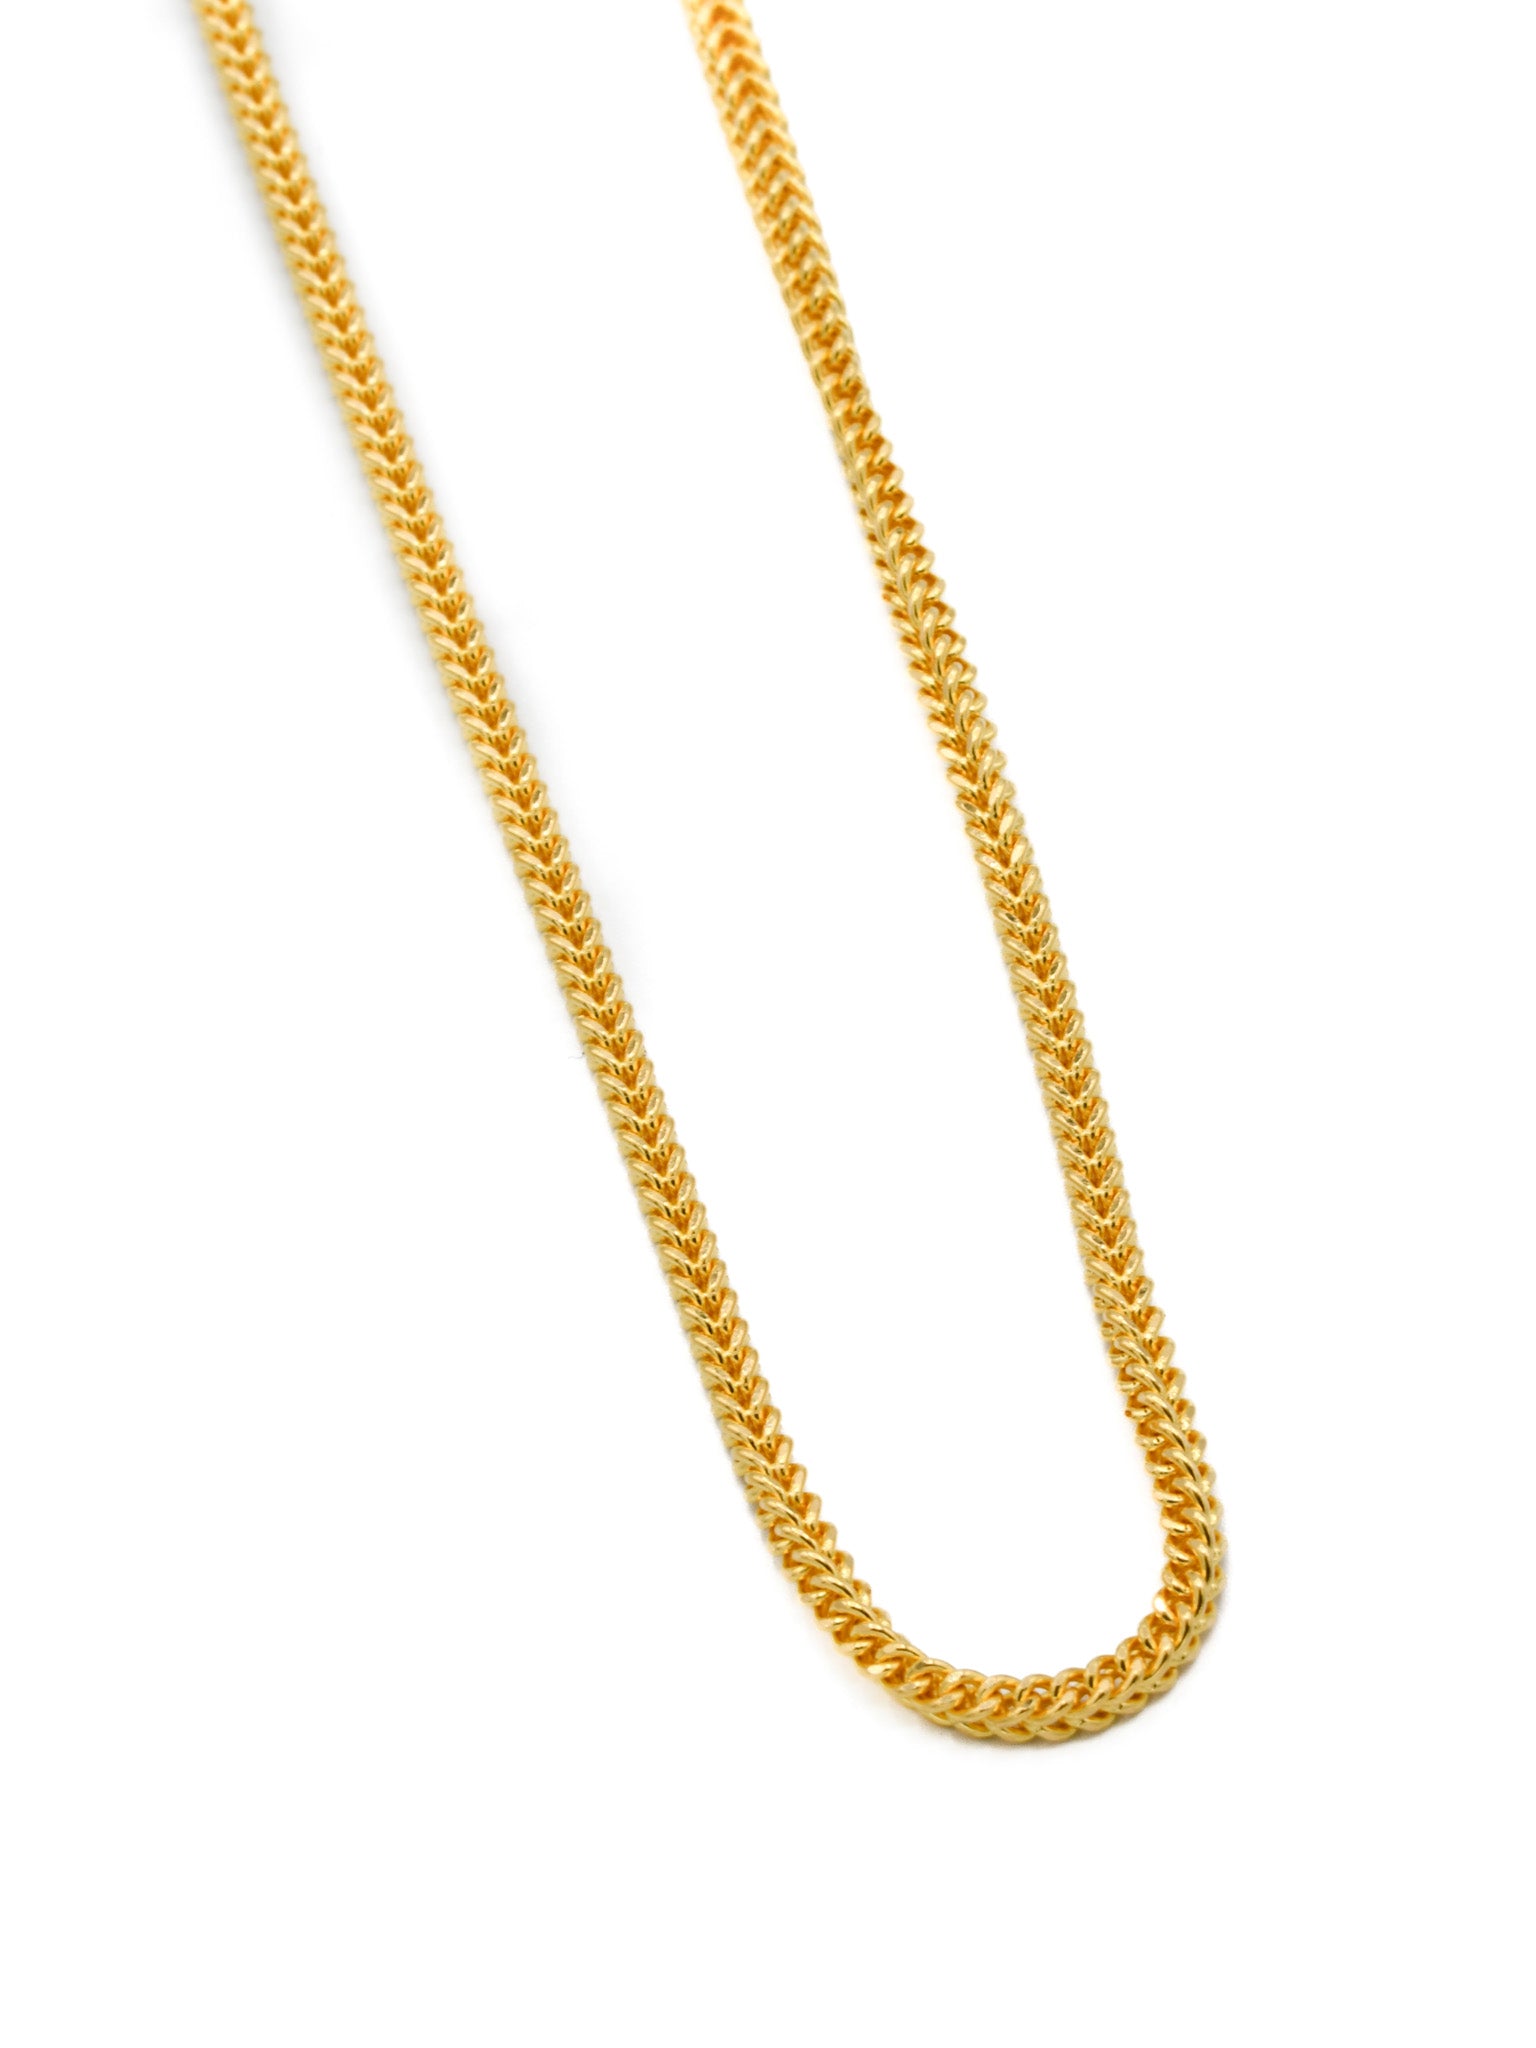 22ct Gold Hollow Fox Tail Chain - 55 cm - Roop Darshan